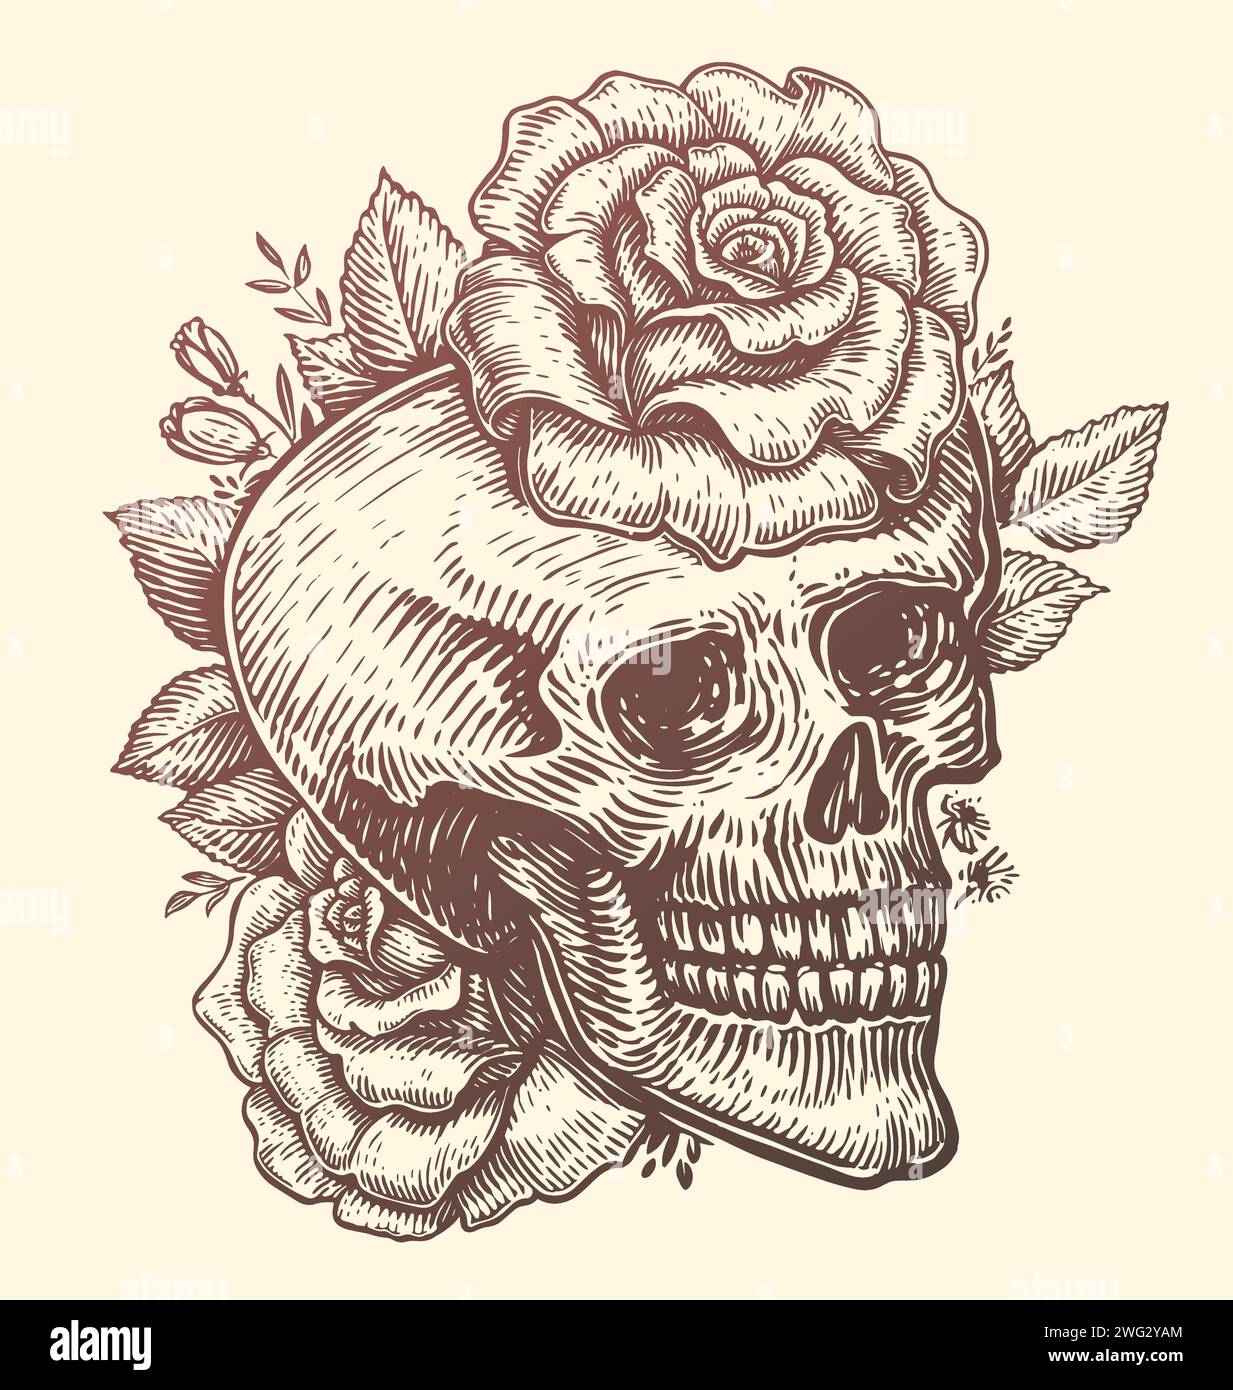 Skull and roses, flowers with leaves. Hand drawn vintage vector illustration Stock Vector